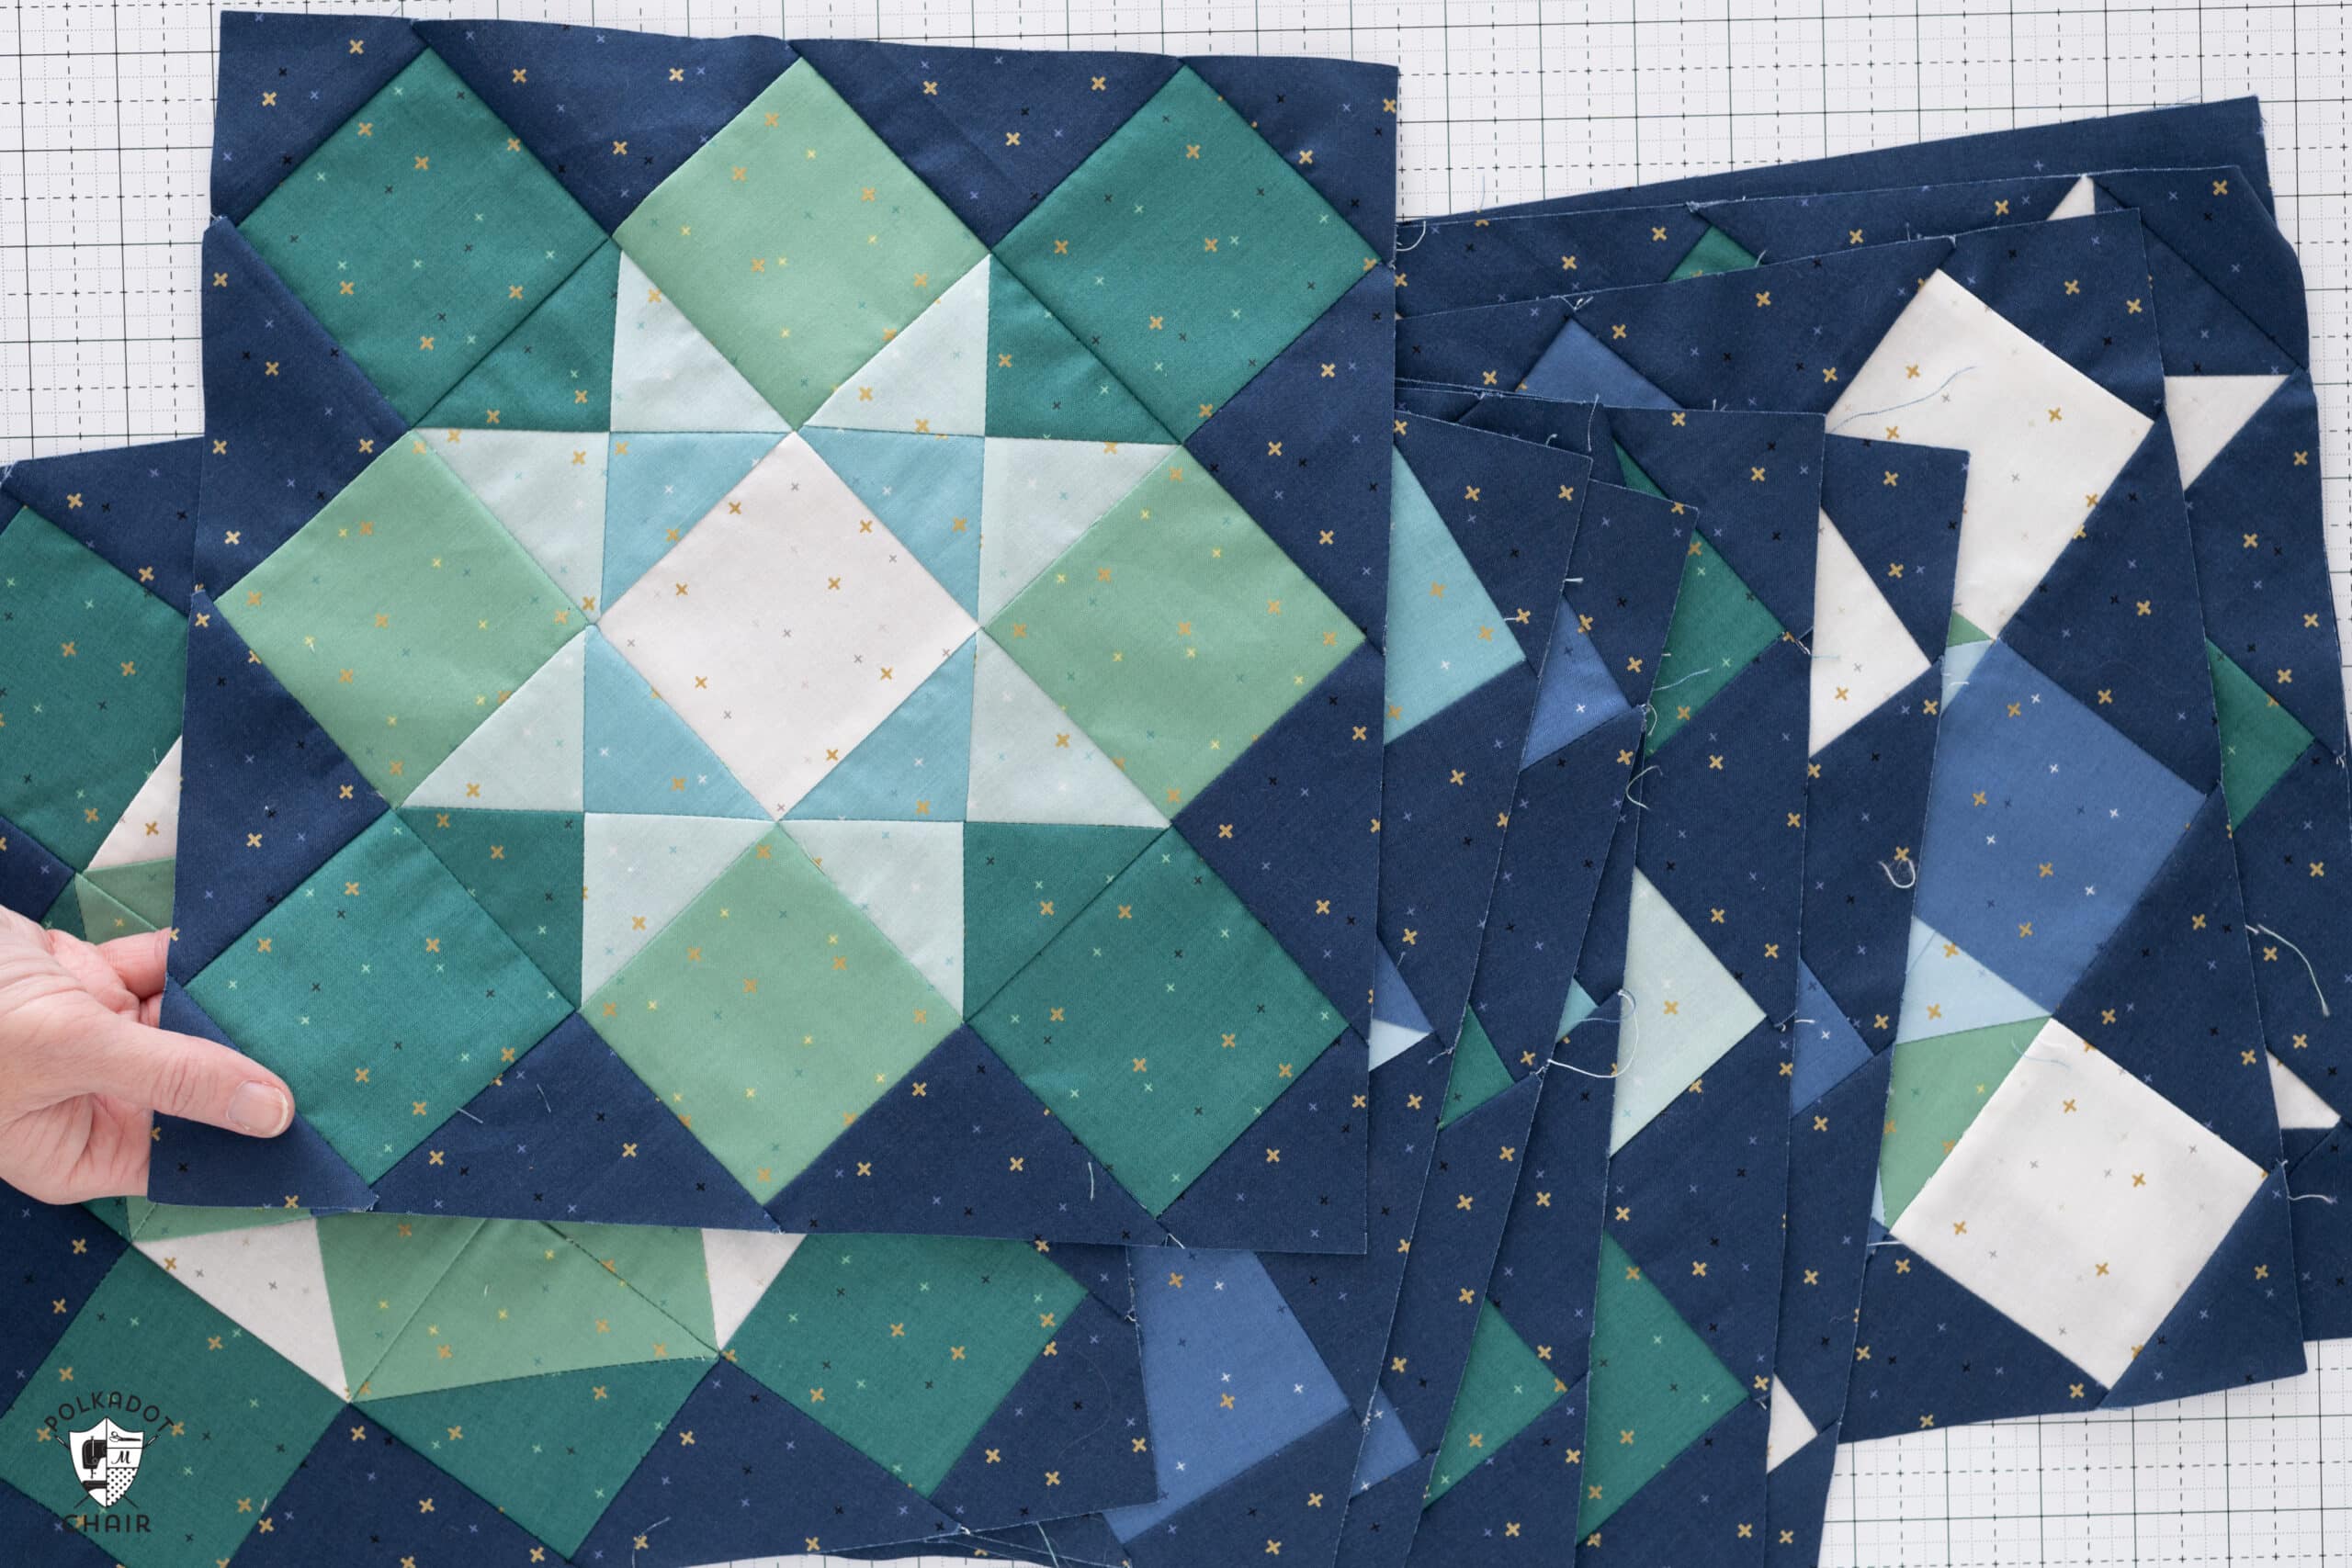 close up view of blue and green quilt blocks